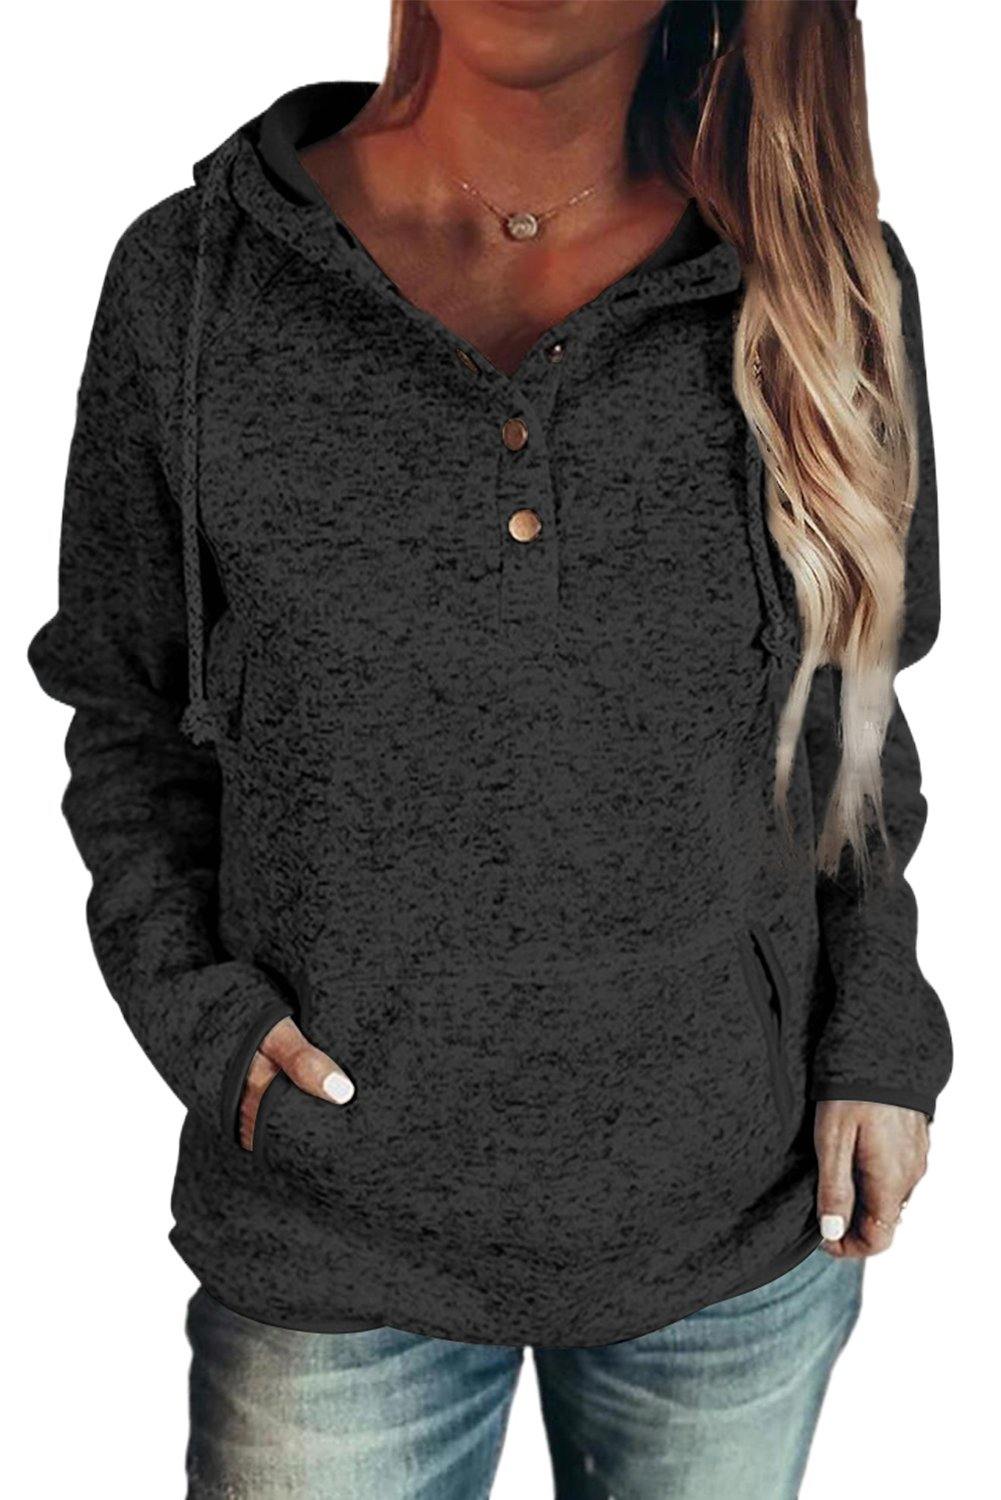 Black Heathered Print Button Snap Neck Pullover Hoodie - L & M Kee, LLC